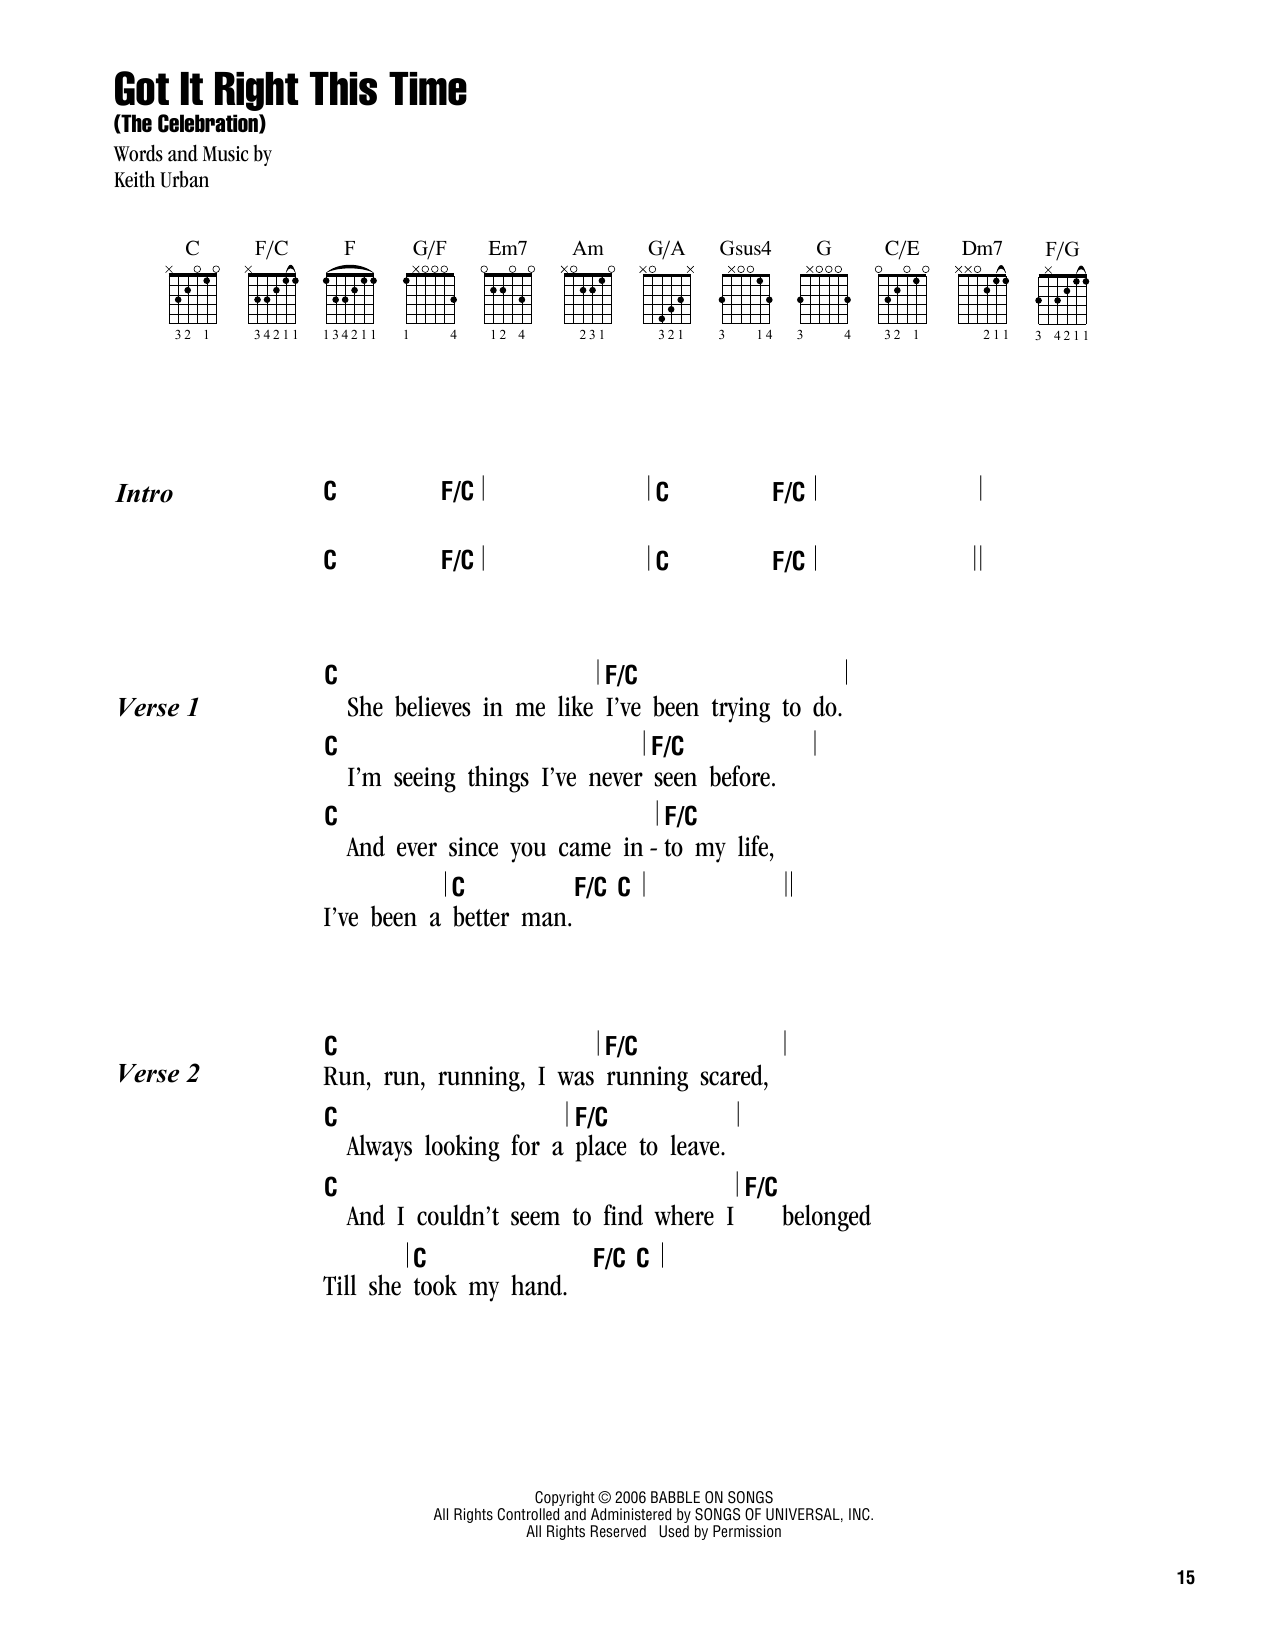 Download Keith Urban Got It Right This Time (The Celebration Sheet Music